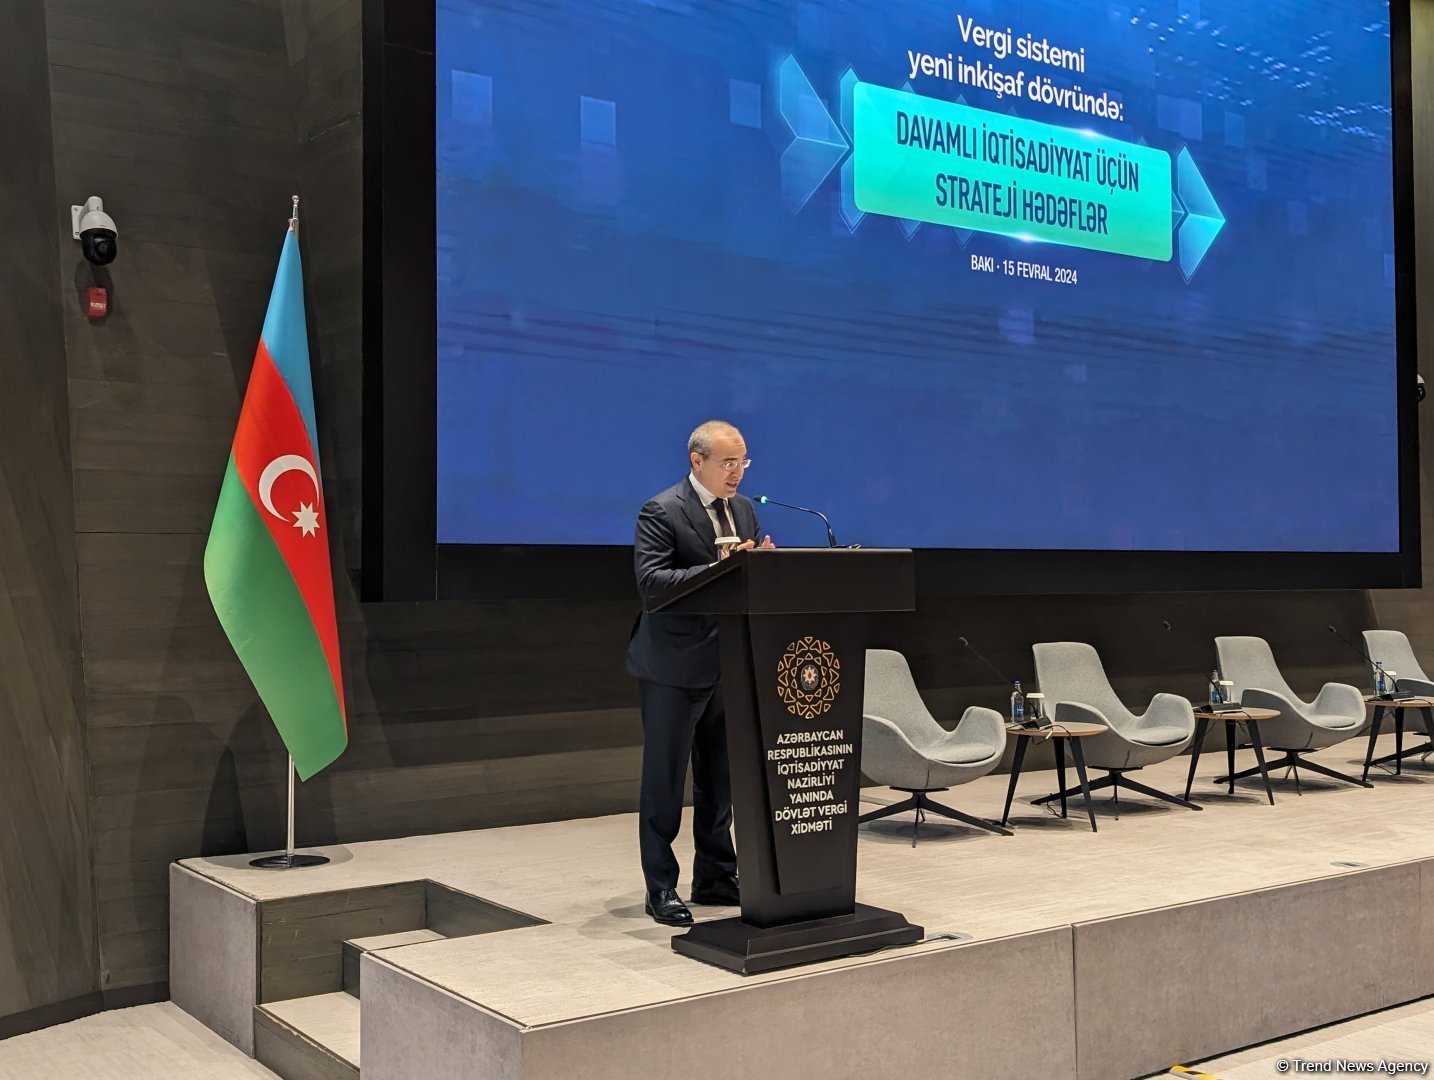 Azerbaijan prioritizes tackling global climate change issues - acting ecology minister